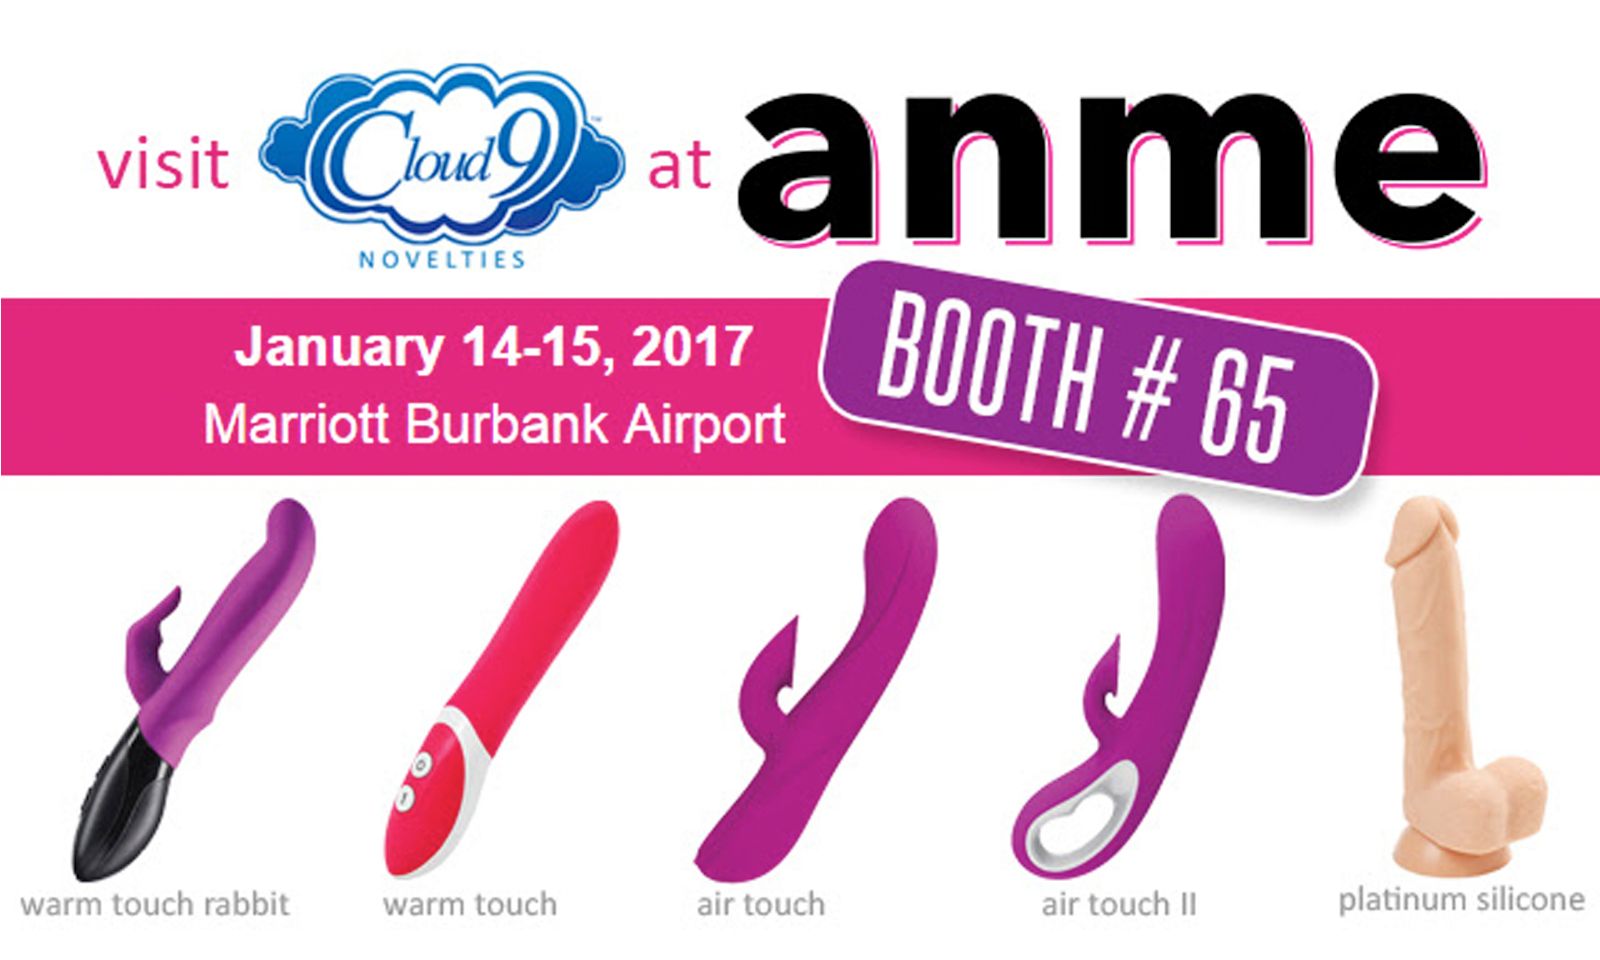 Cloud 9 Novelties Presents New Items At ANME